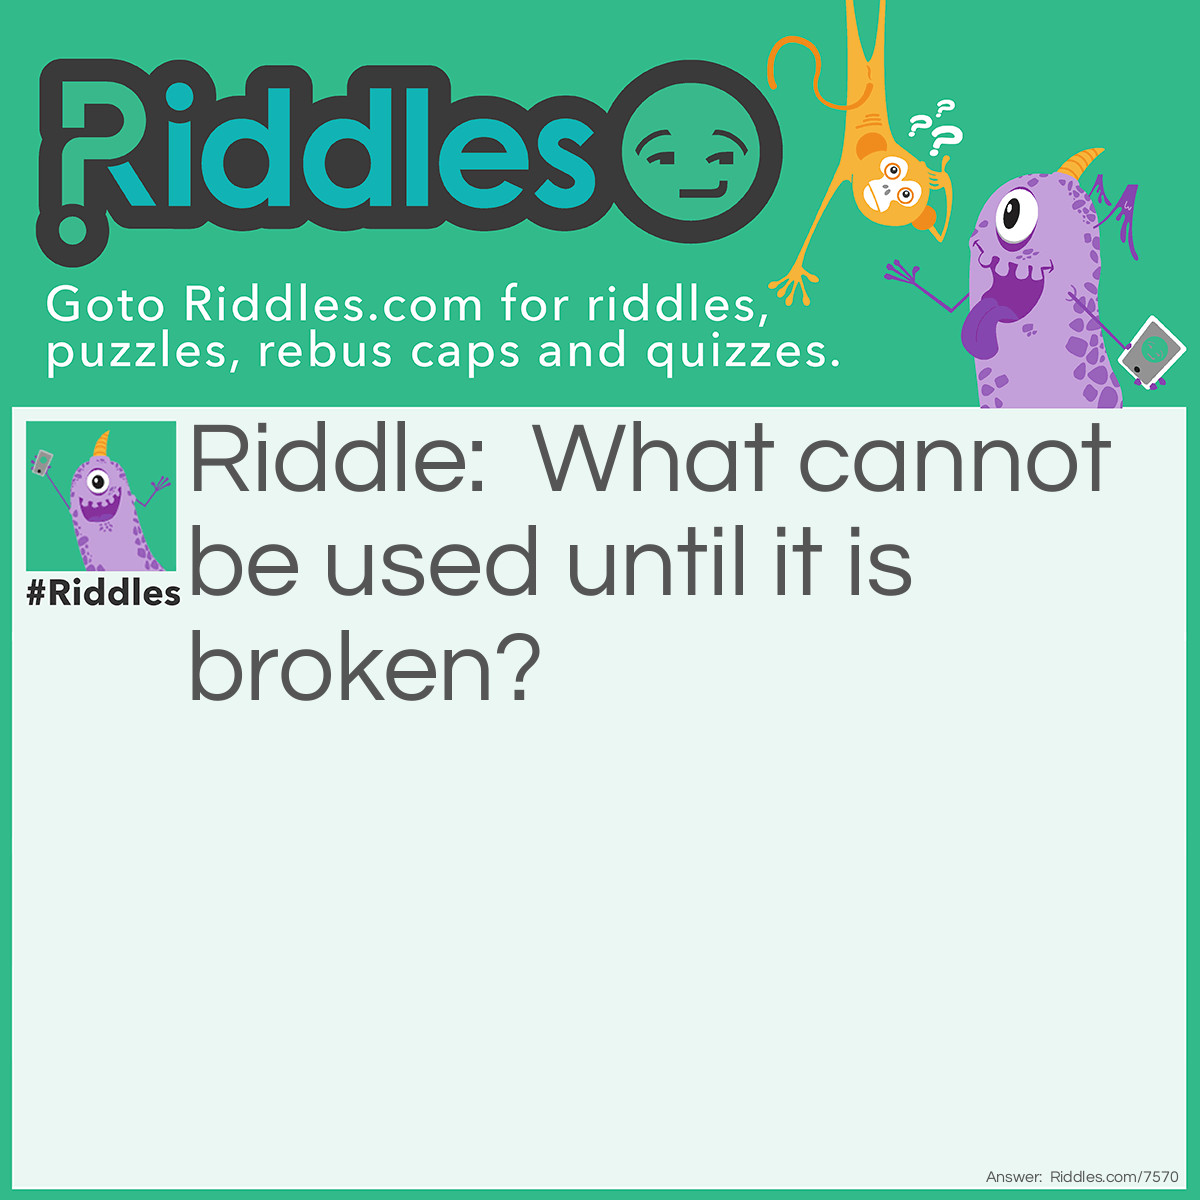 Riddle: What cannot be used until it is broken? Answer: An Egg